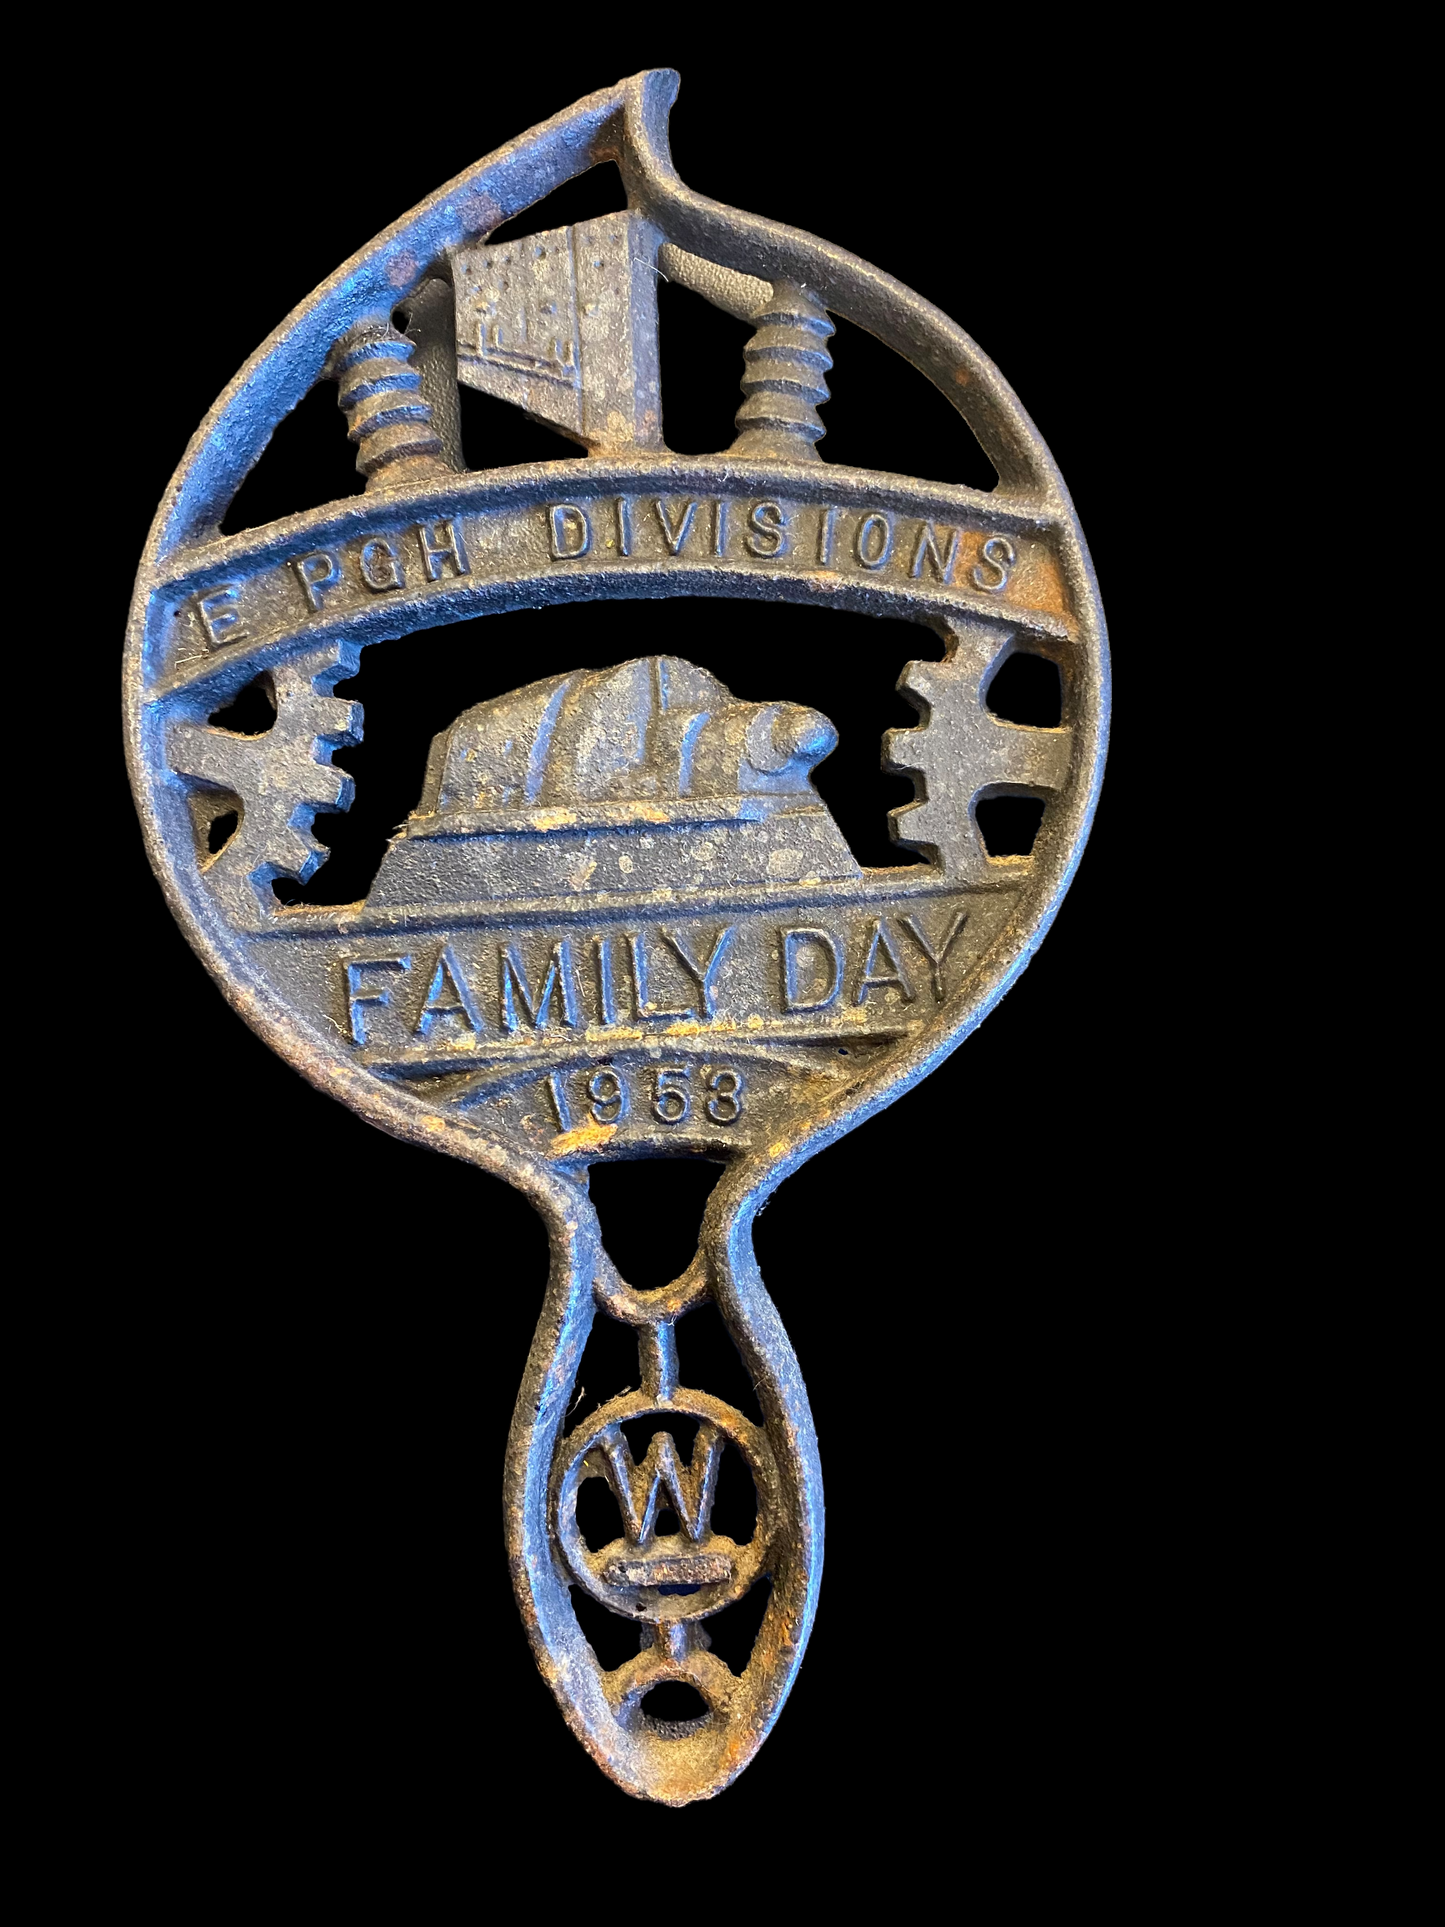 WESTINGHOUSE Electric E. Pittsburgh Div 1953 Family Day Trivet TRAFFORD FOUNDRY